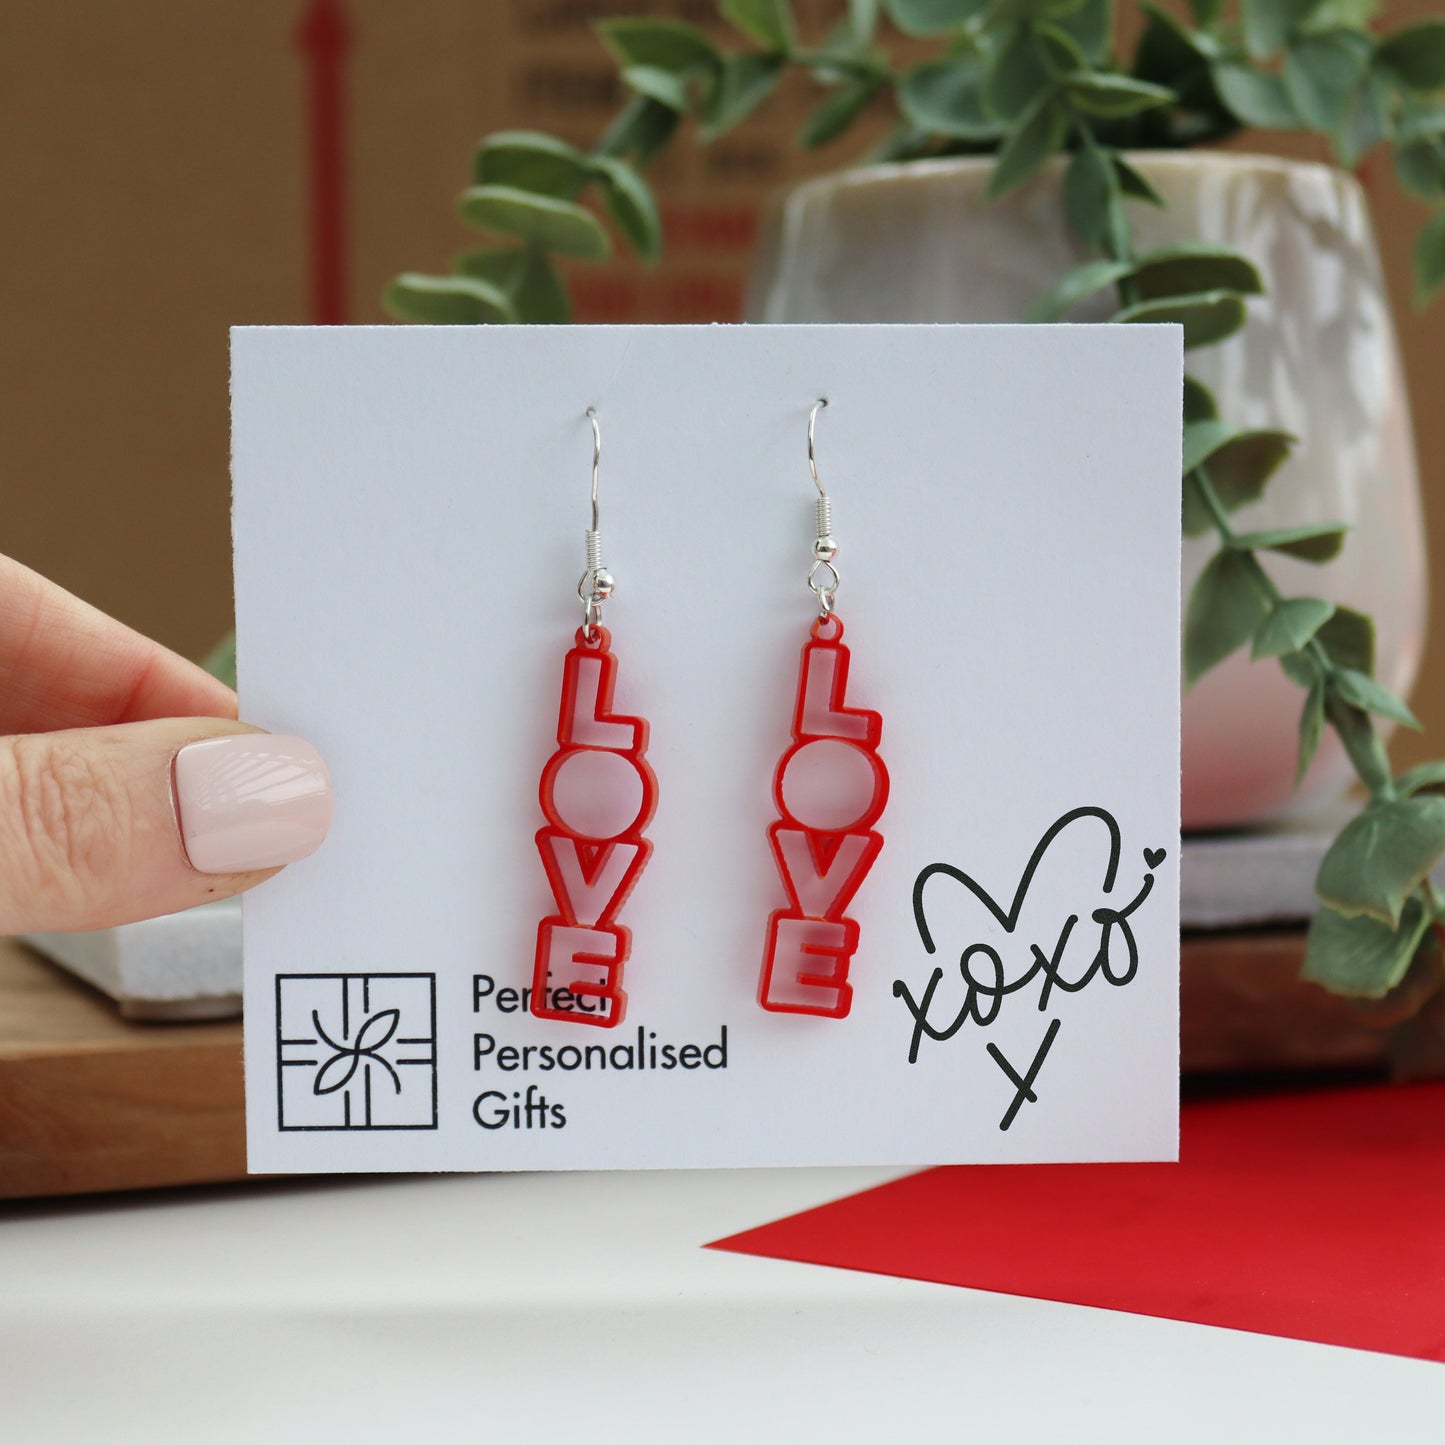 LOVE laser cut red acrylic valentines earrings dangly earrings with the word LOVE in a vertical direction shown by a hand holding the backing gift card